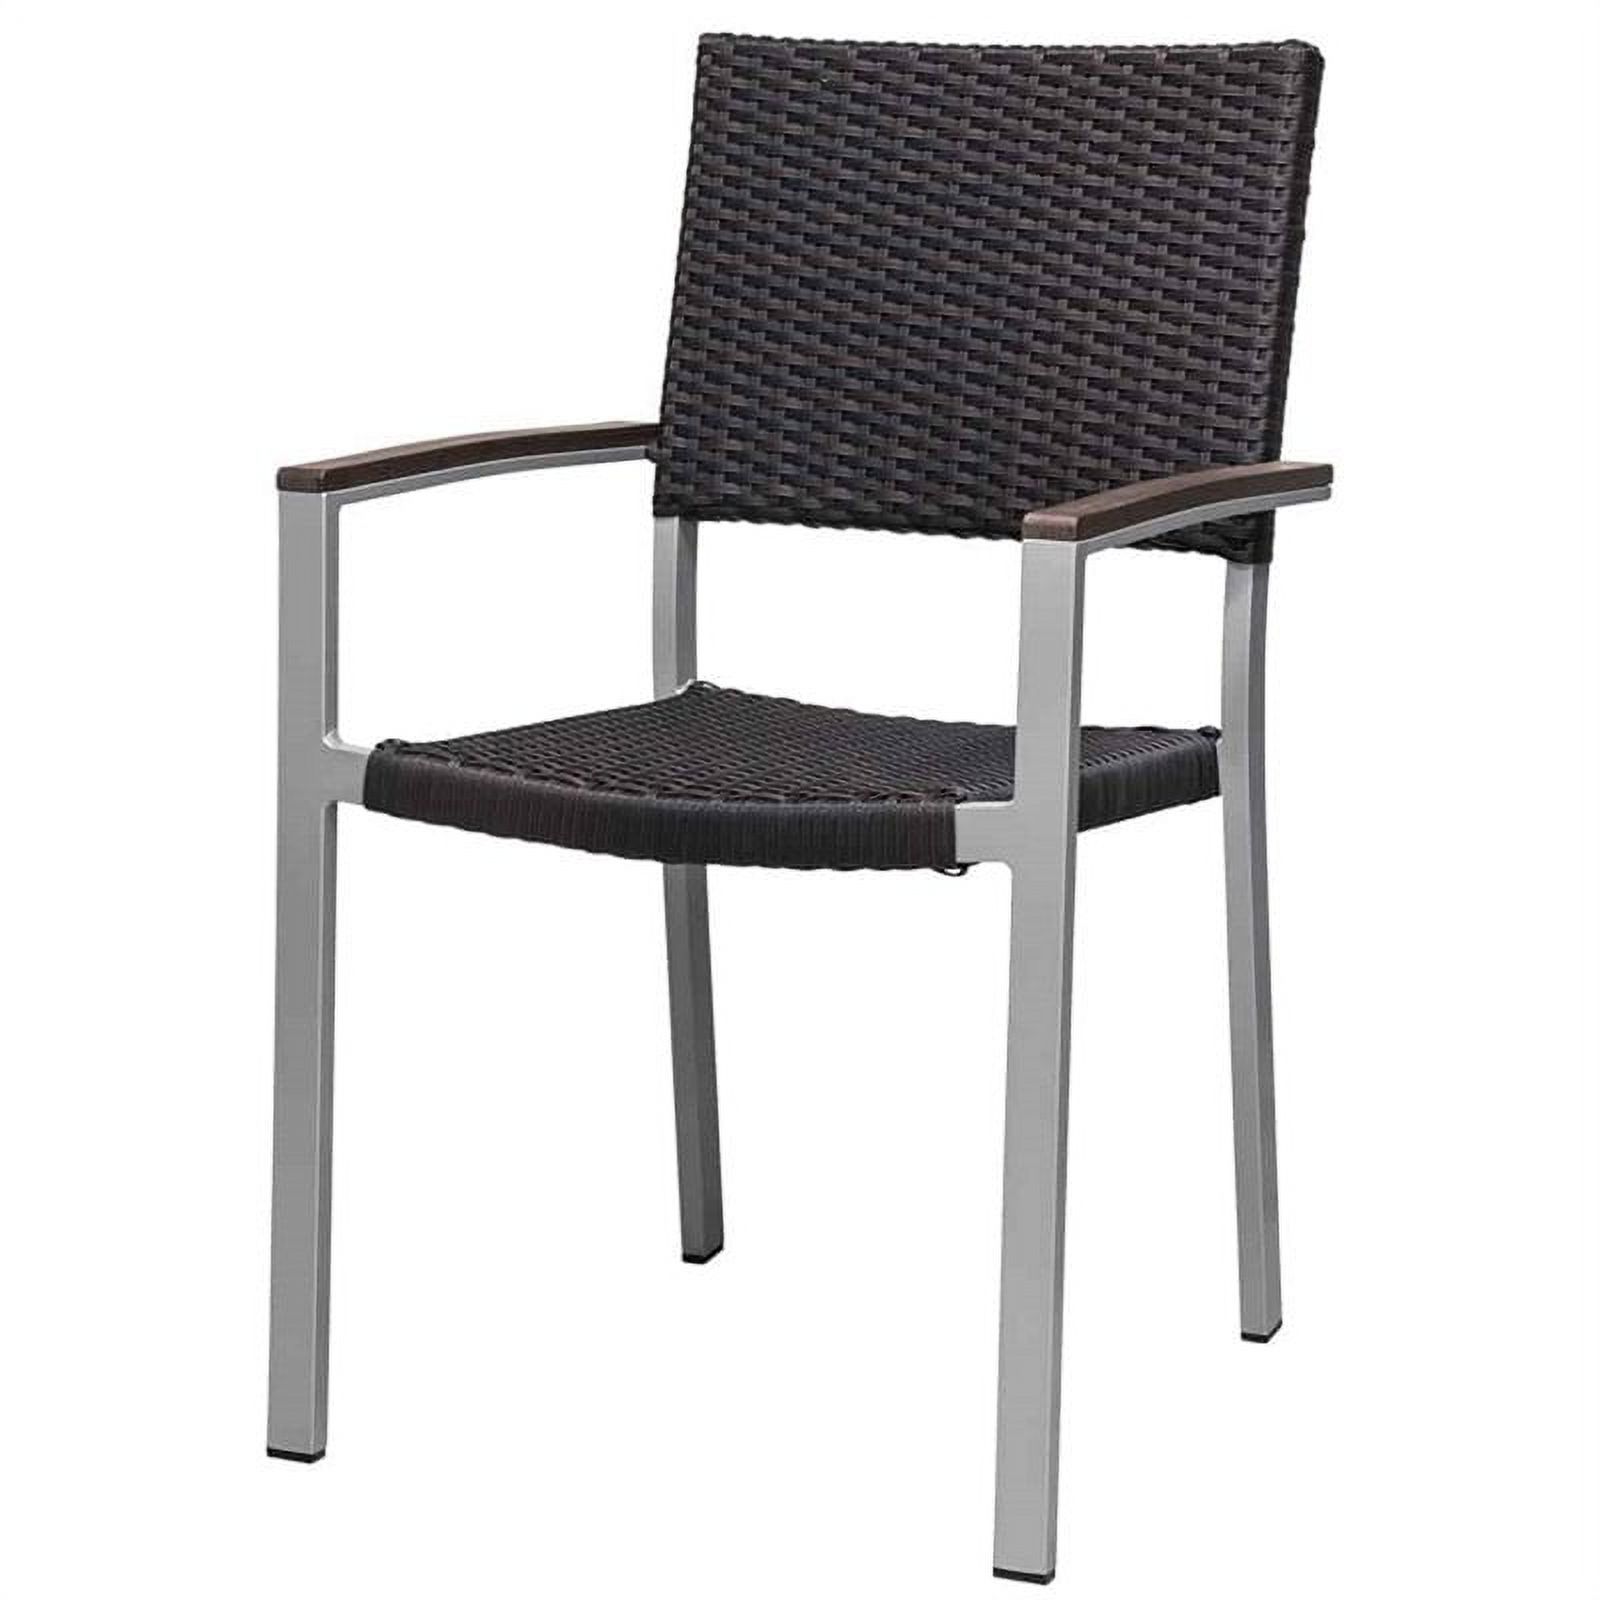 Source Furniture Fiji Wicker Patio Dining Arm Chair in Espresso - image 1 of 1